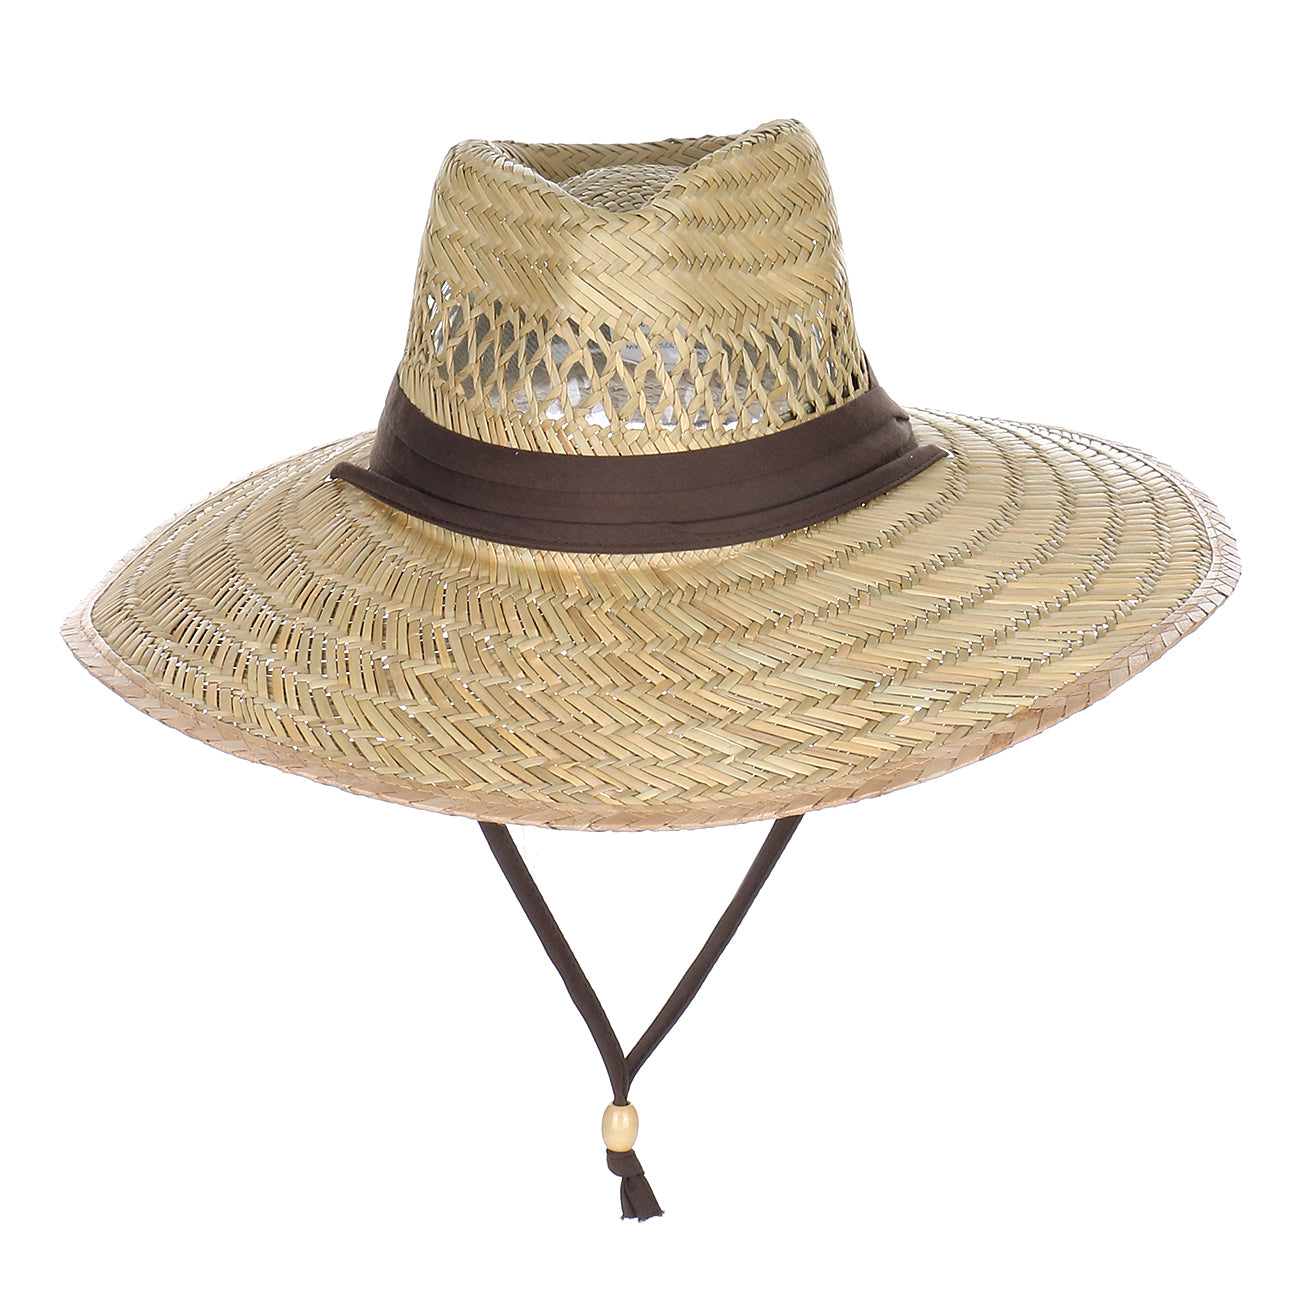 Lifeguard Straw Hat with Fabric Band and Chin Cord